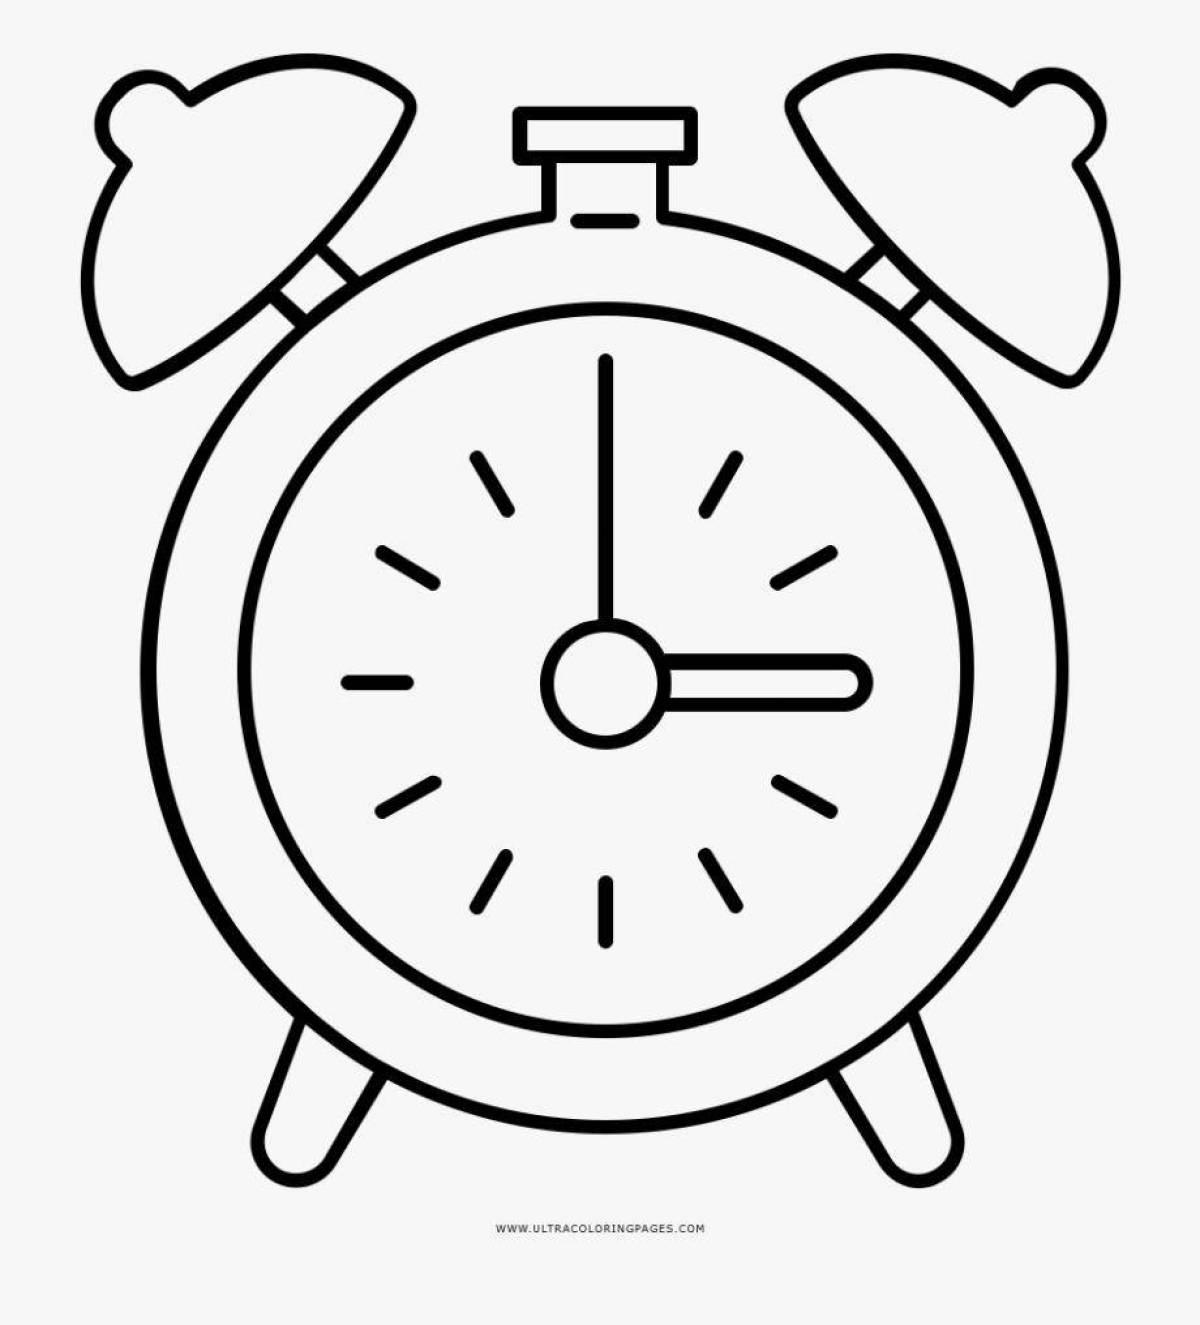 Colorful alarm clock coloring book for little artists